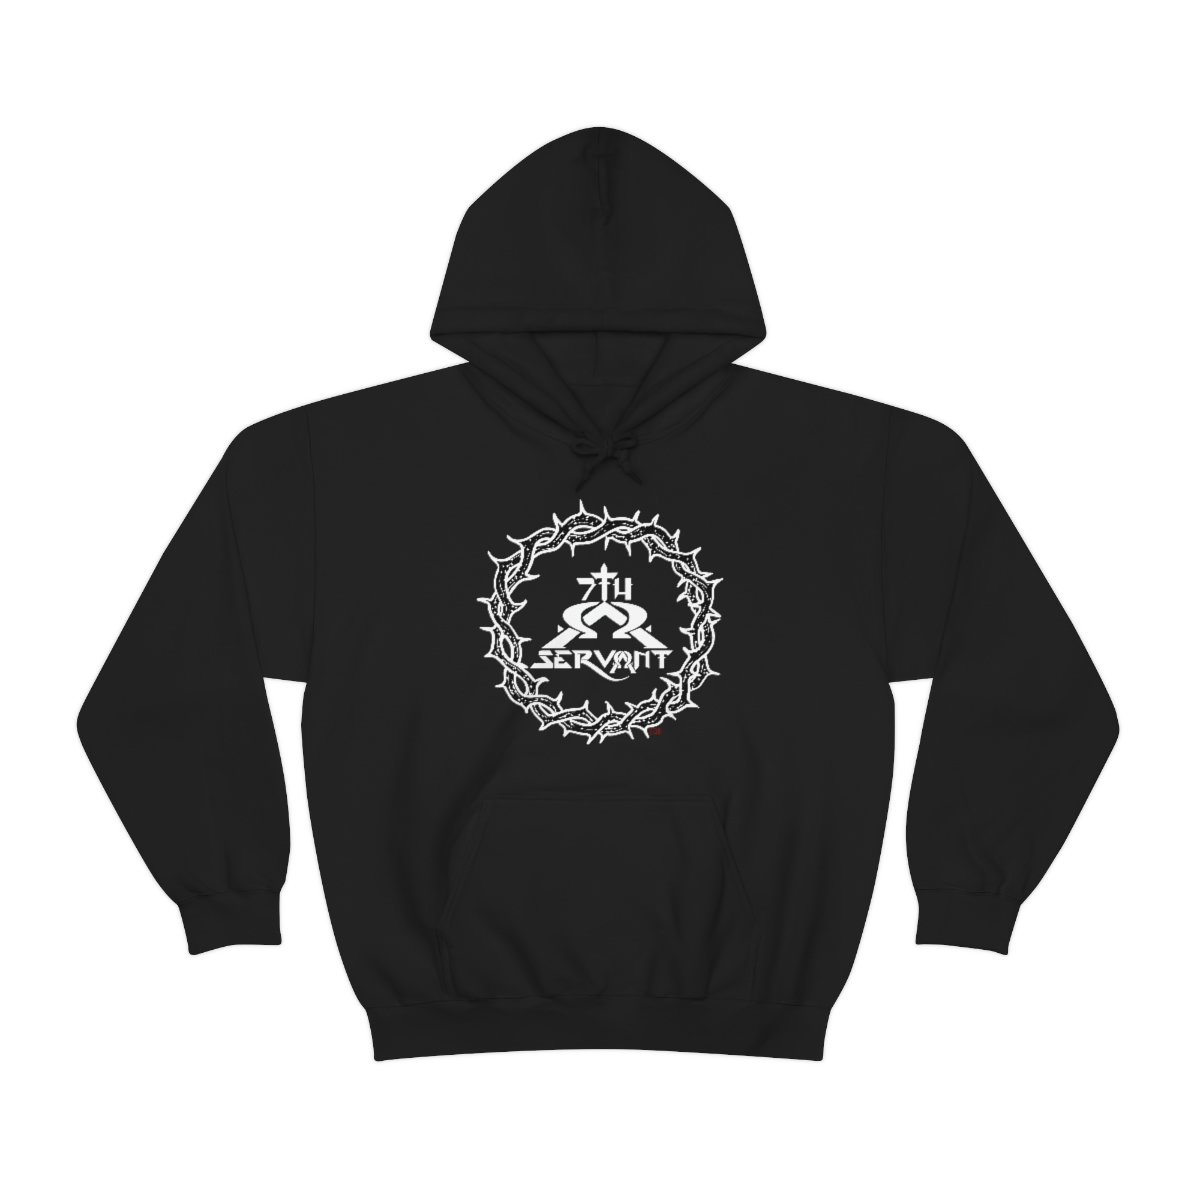 Seventh Servant Alpha and Omega Pullover Hooded Sweatshirt